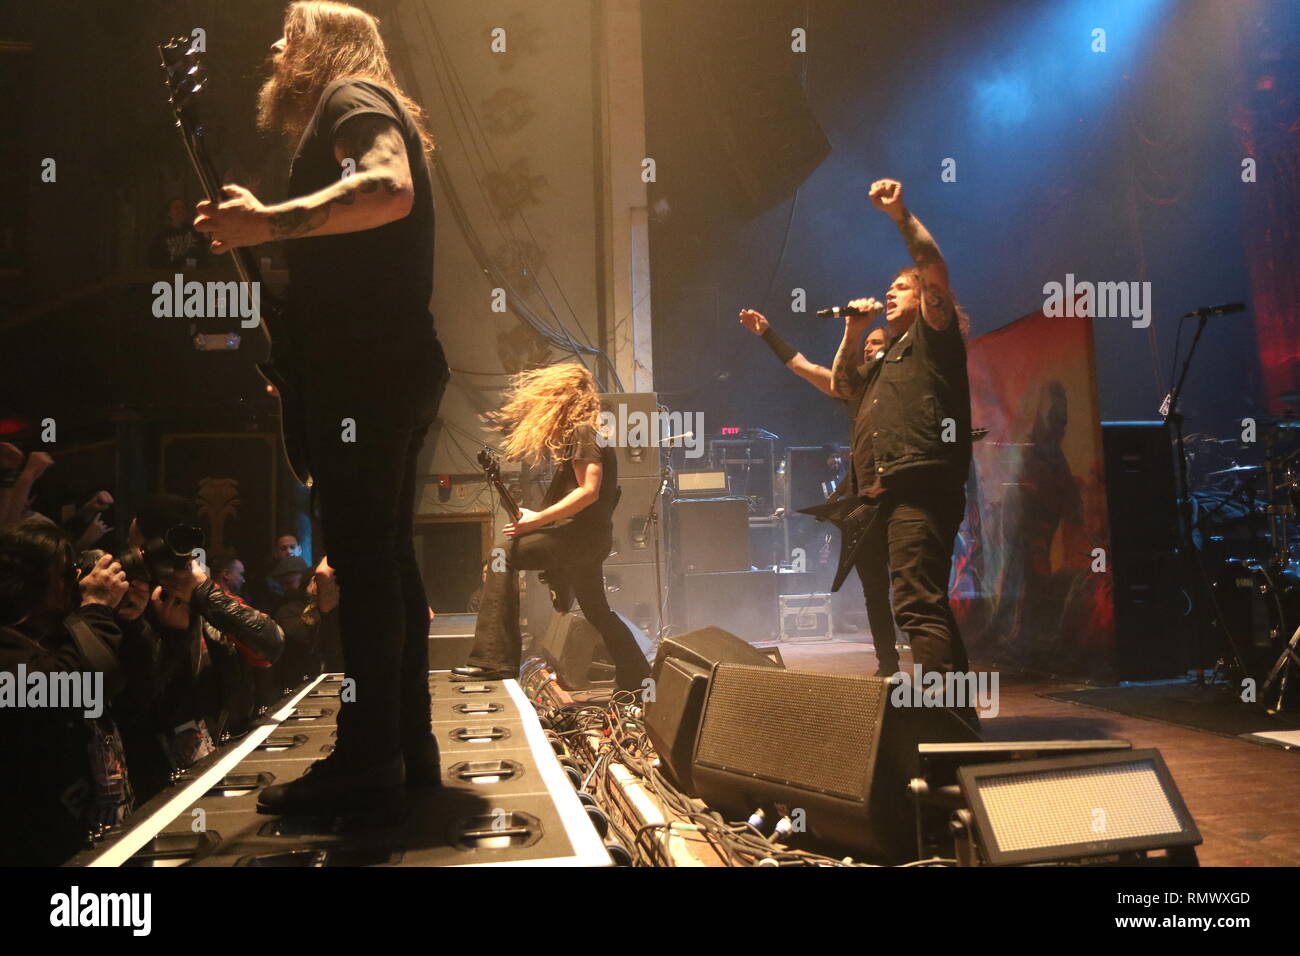 Exodus is shown performing on stage during a 'live' in concert appearance. Stock Photo